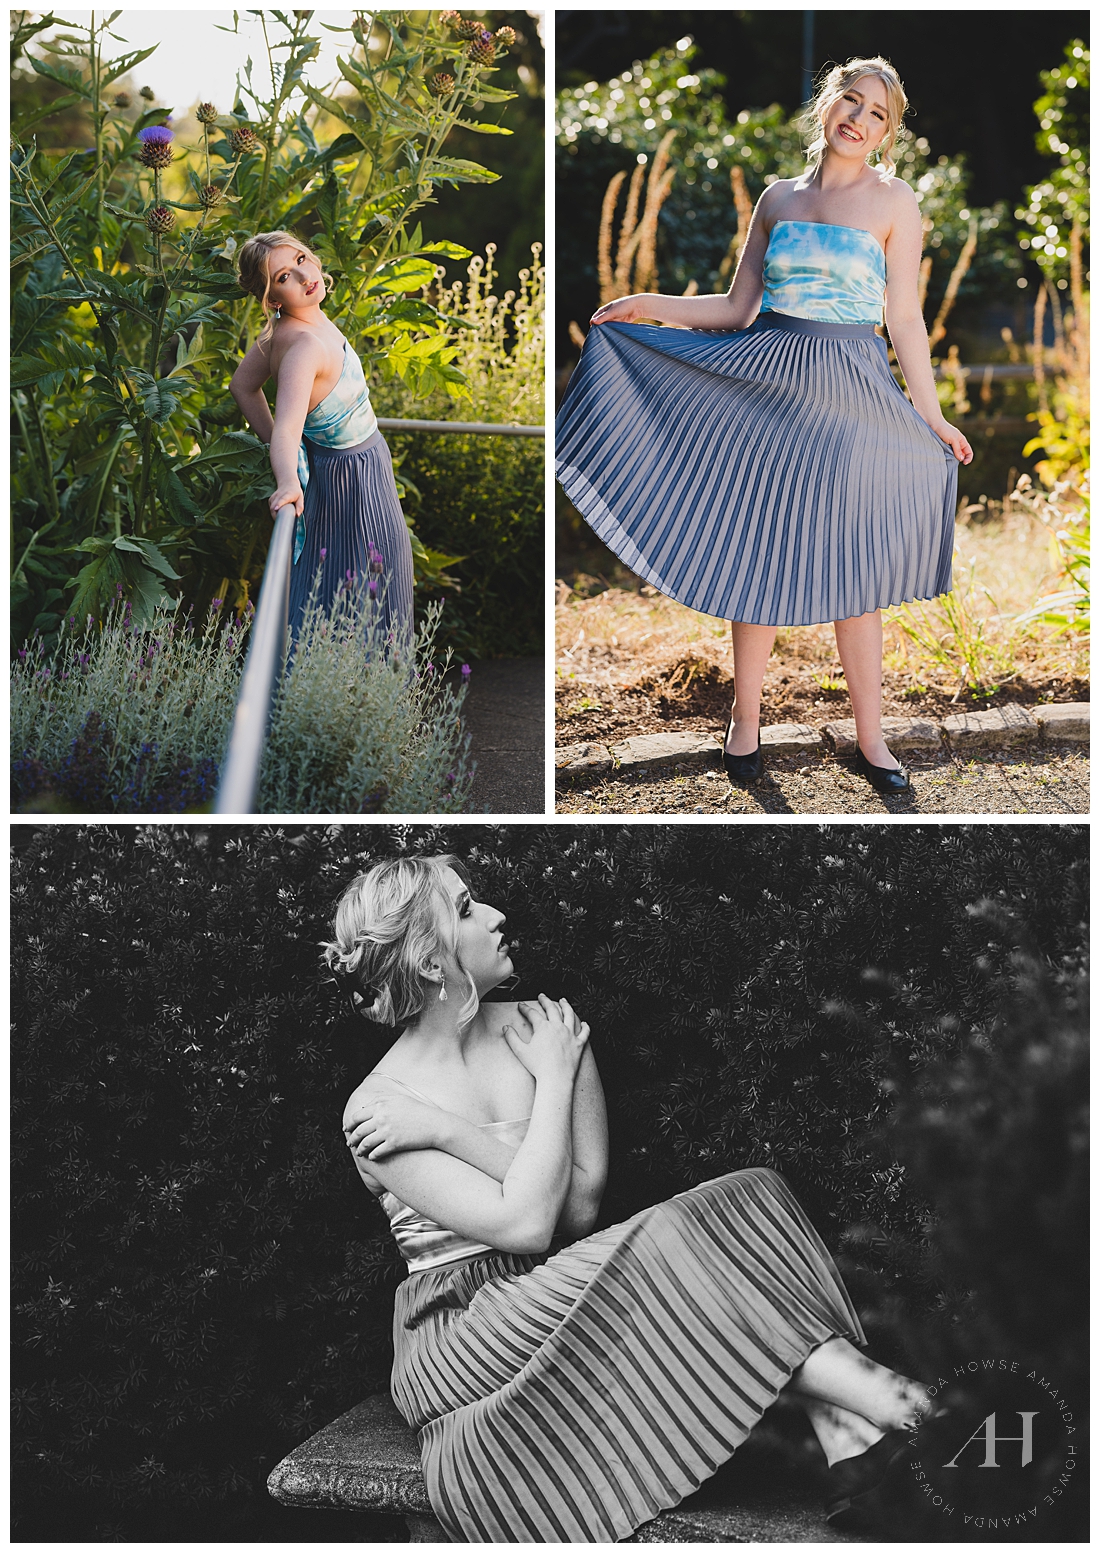 How to Style a Skirt for Senior Portraits | Glam Hair and Makeup for Tacoma Senior Portraits | Photographed by the Best Tacoma Senior Portrait Photographer Amanda Howse Photography